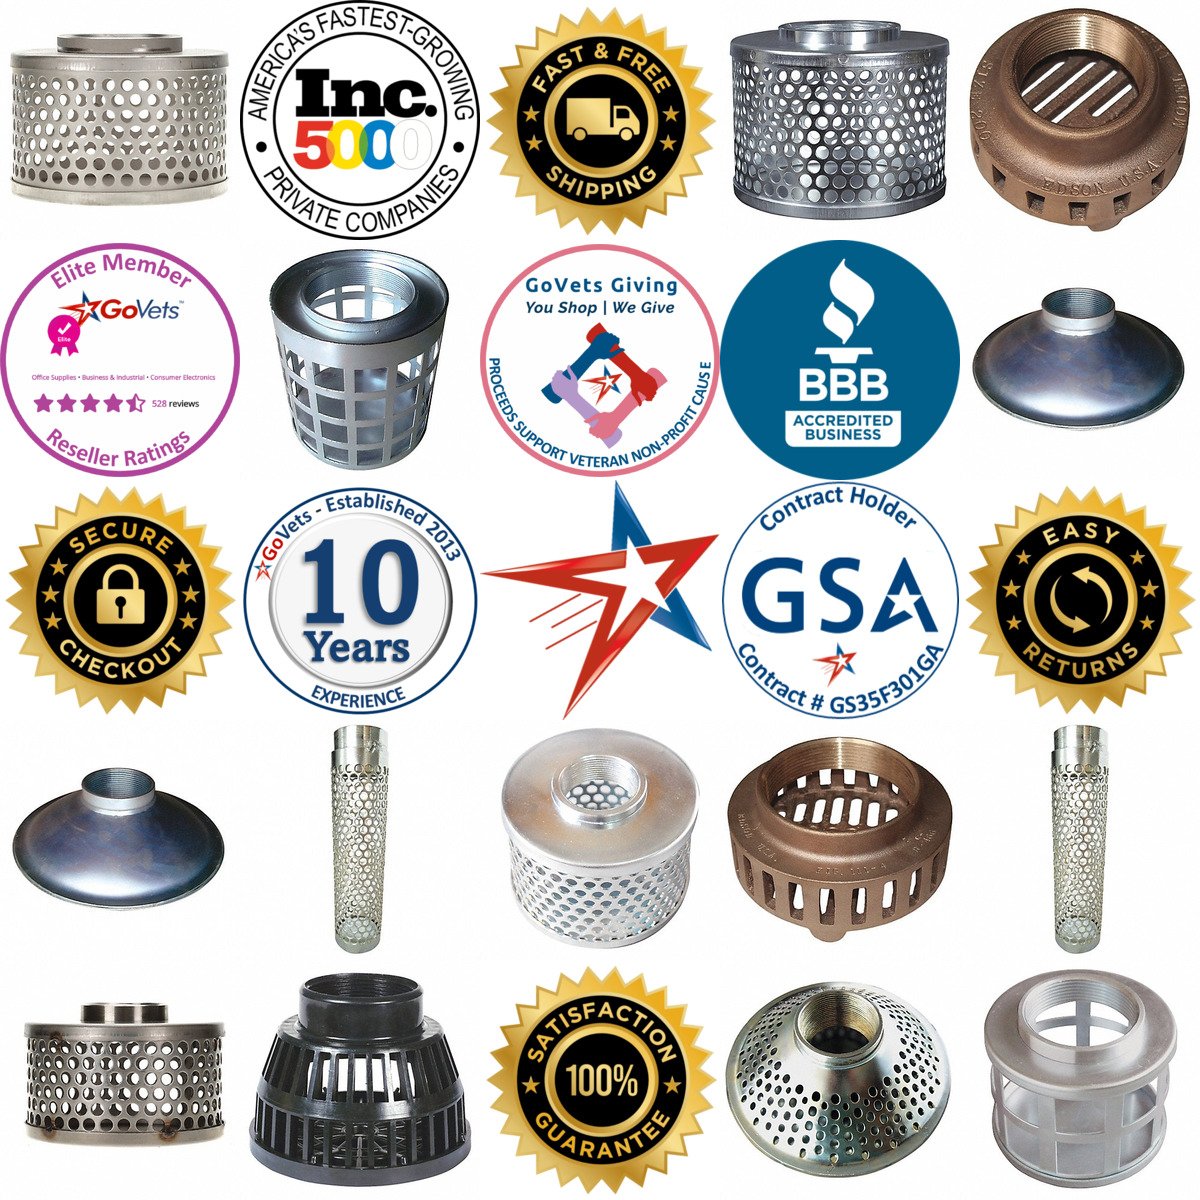 A selection of Trash Pump Suction Strainers products on GoVets